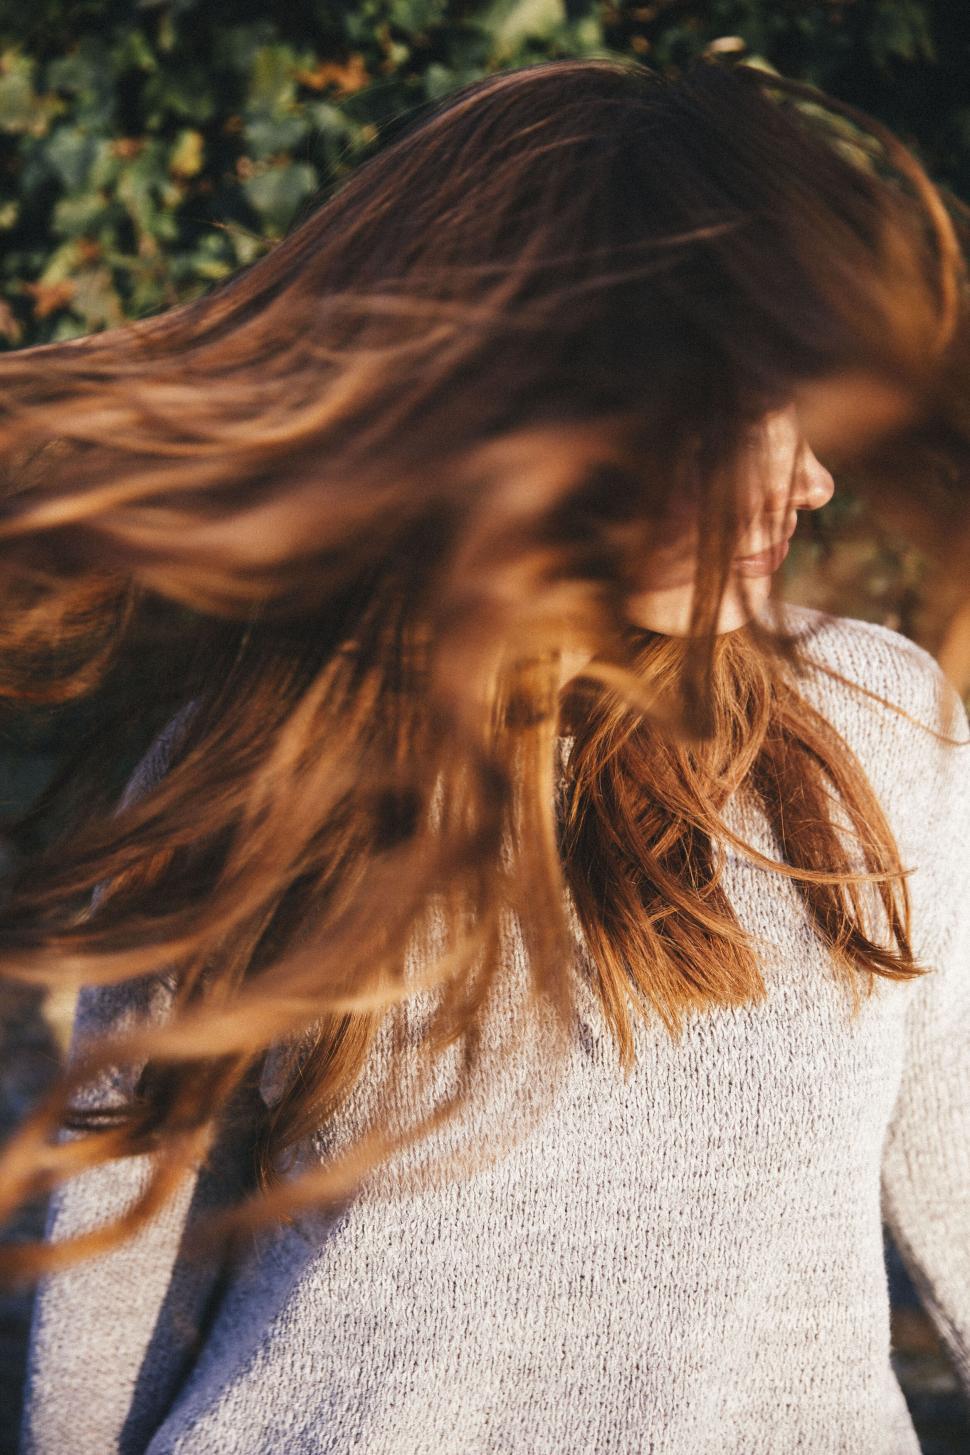 Free Image of Hair flowing in the breeze, woman obscured 